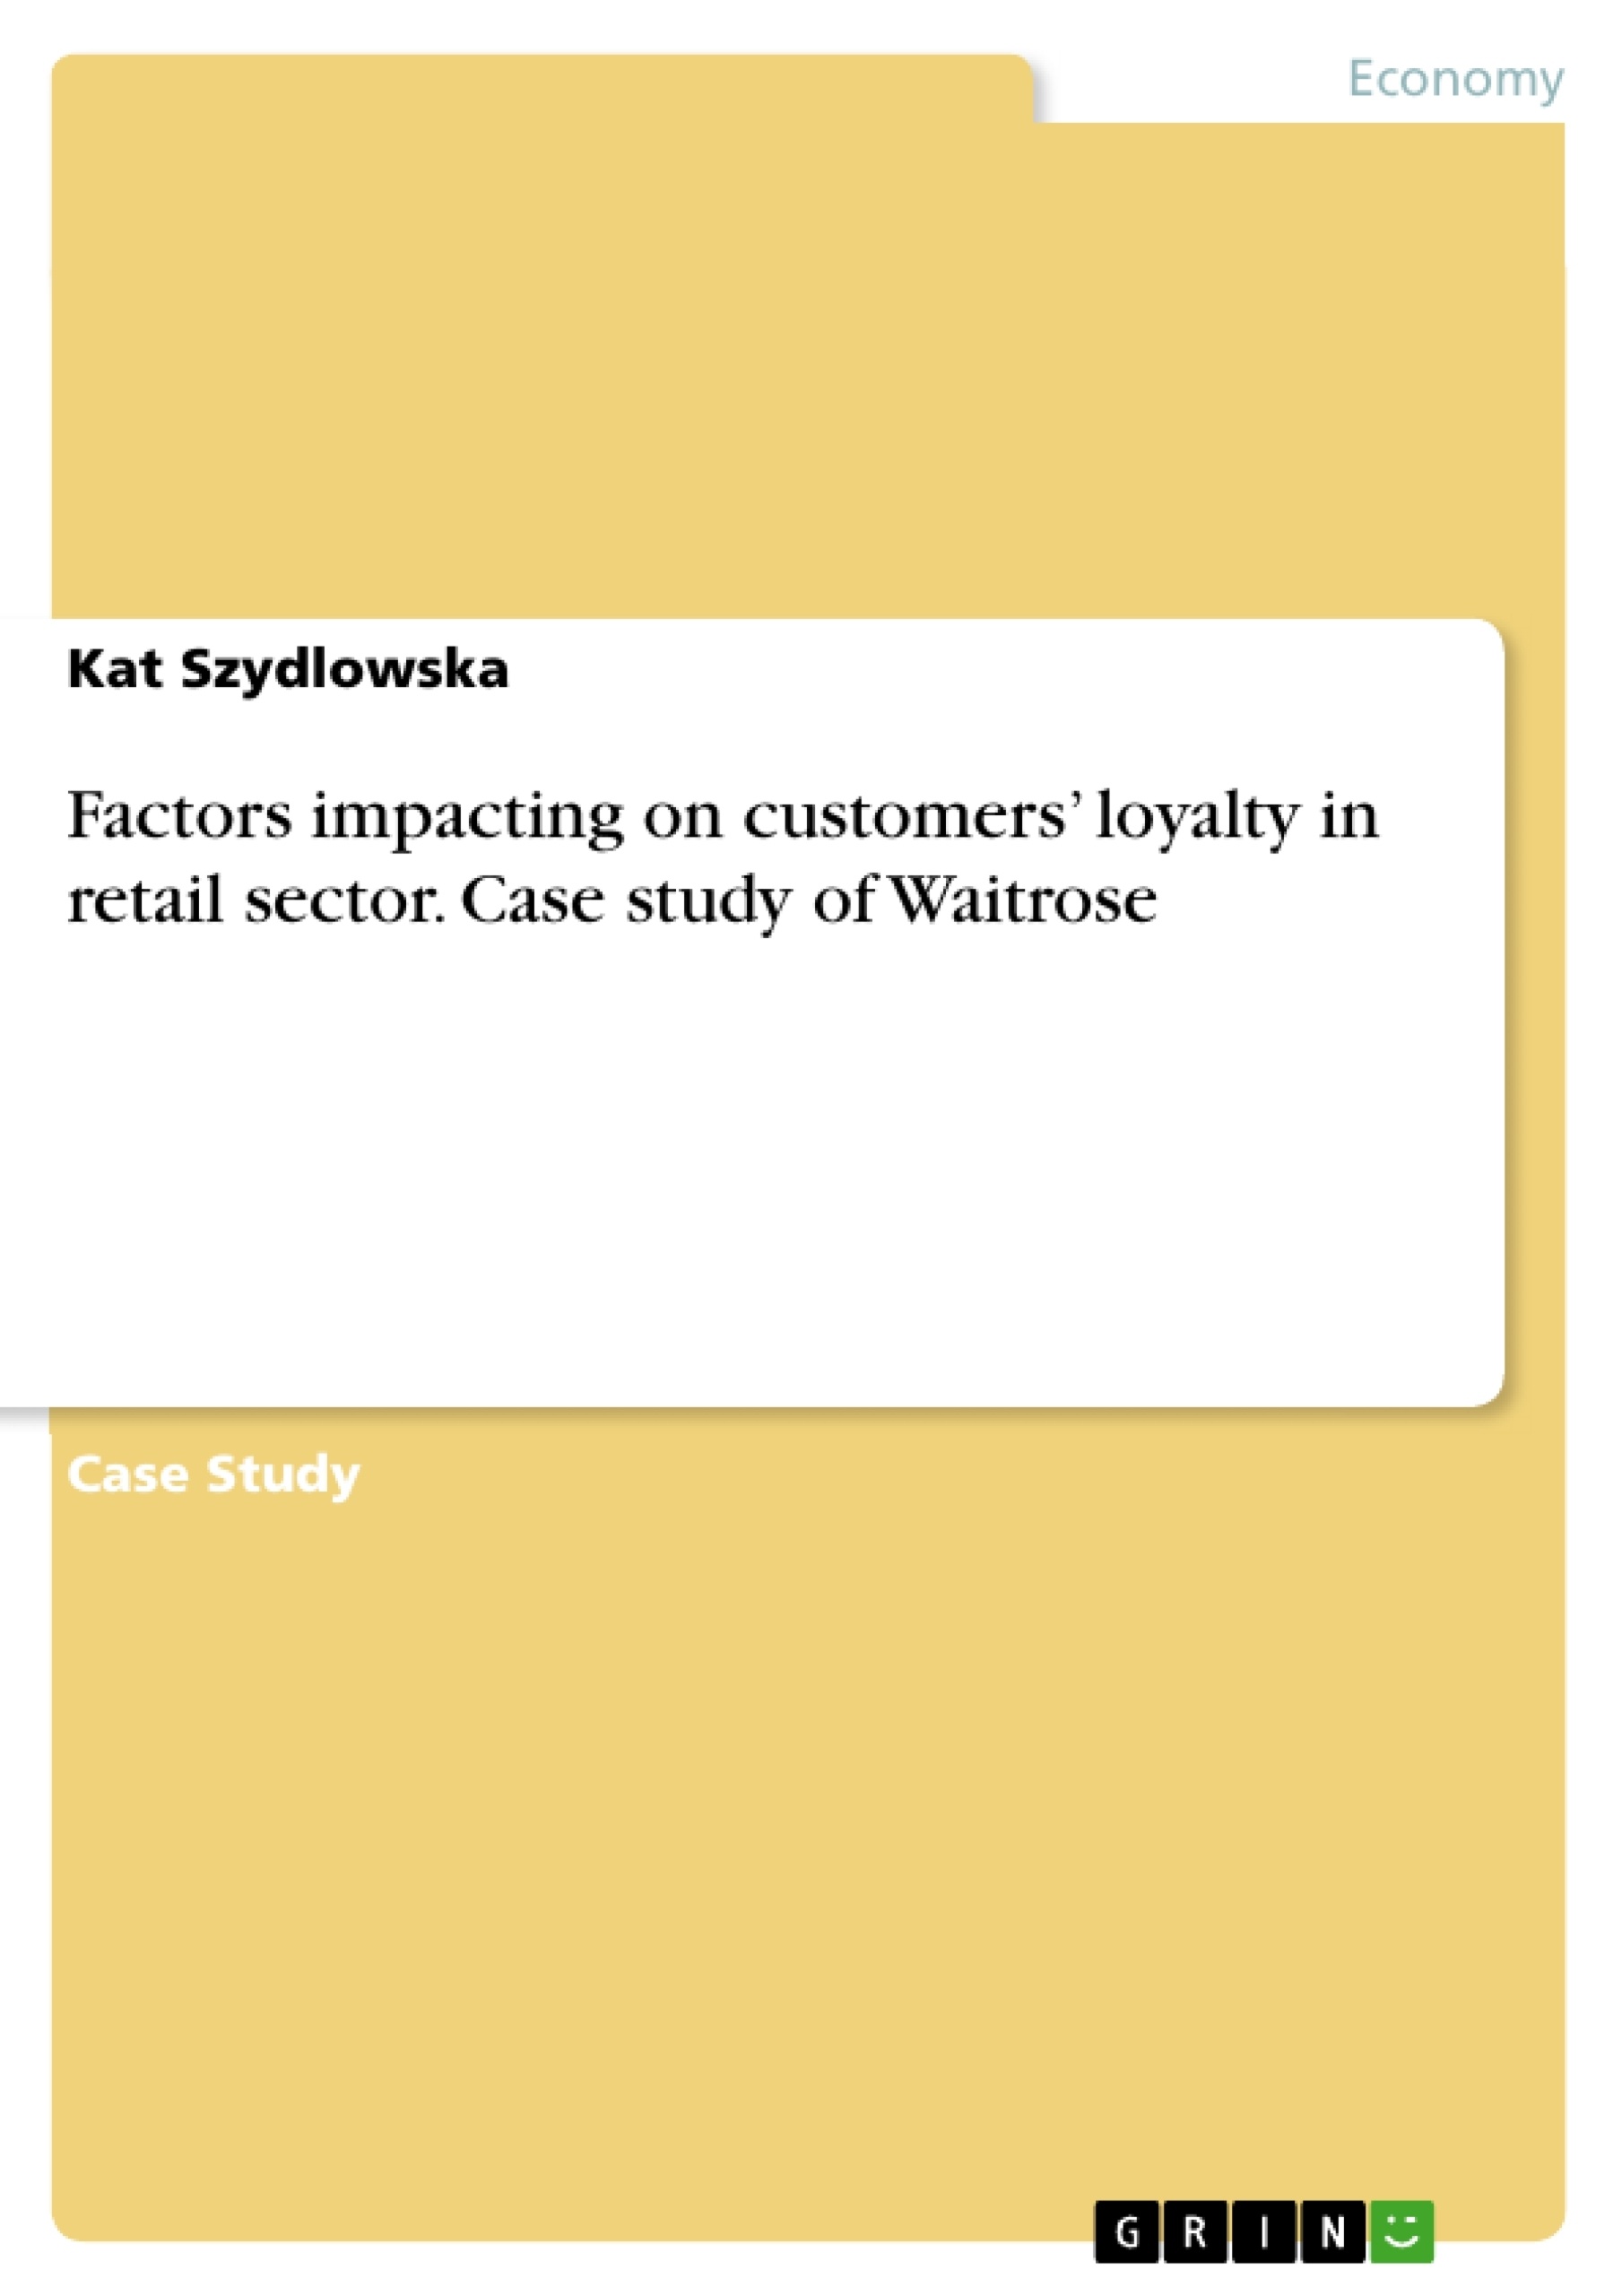 Titre: Factors impacting on customers’ loyalty in retail sector. Case study of Waitrose